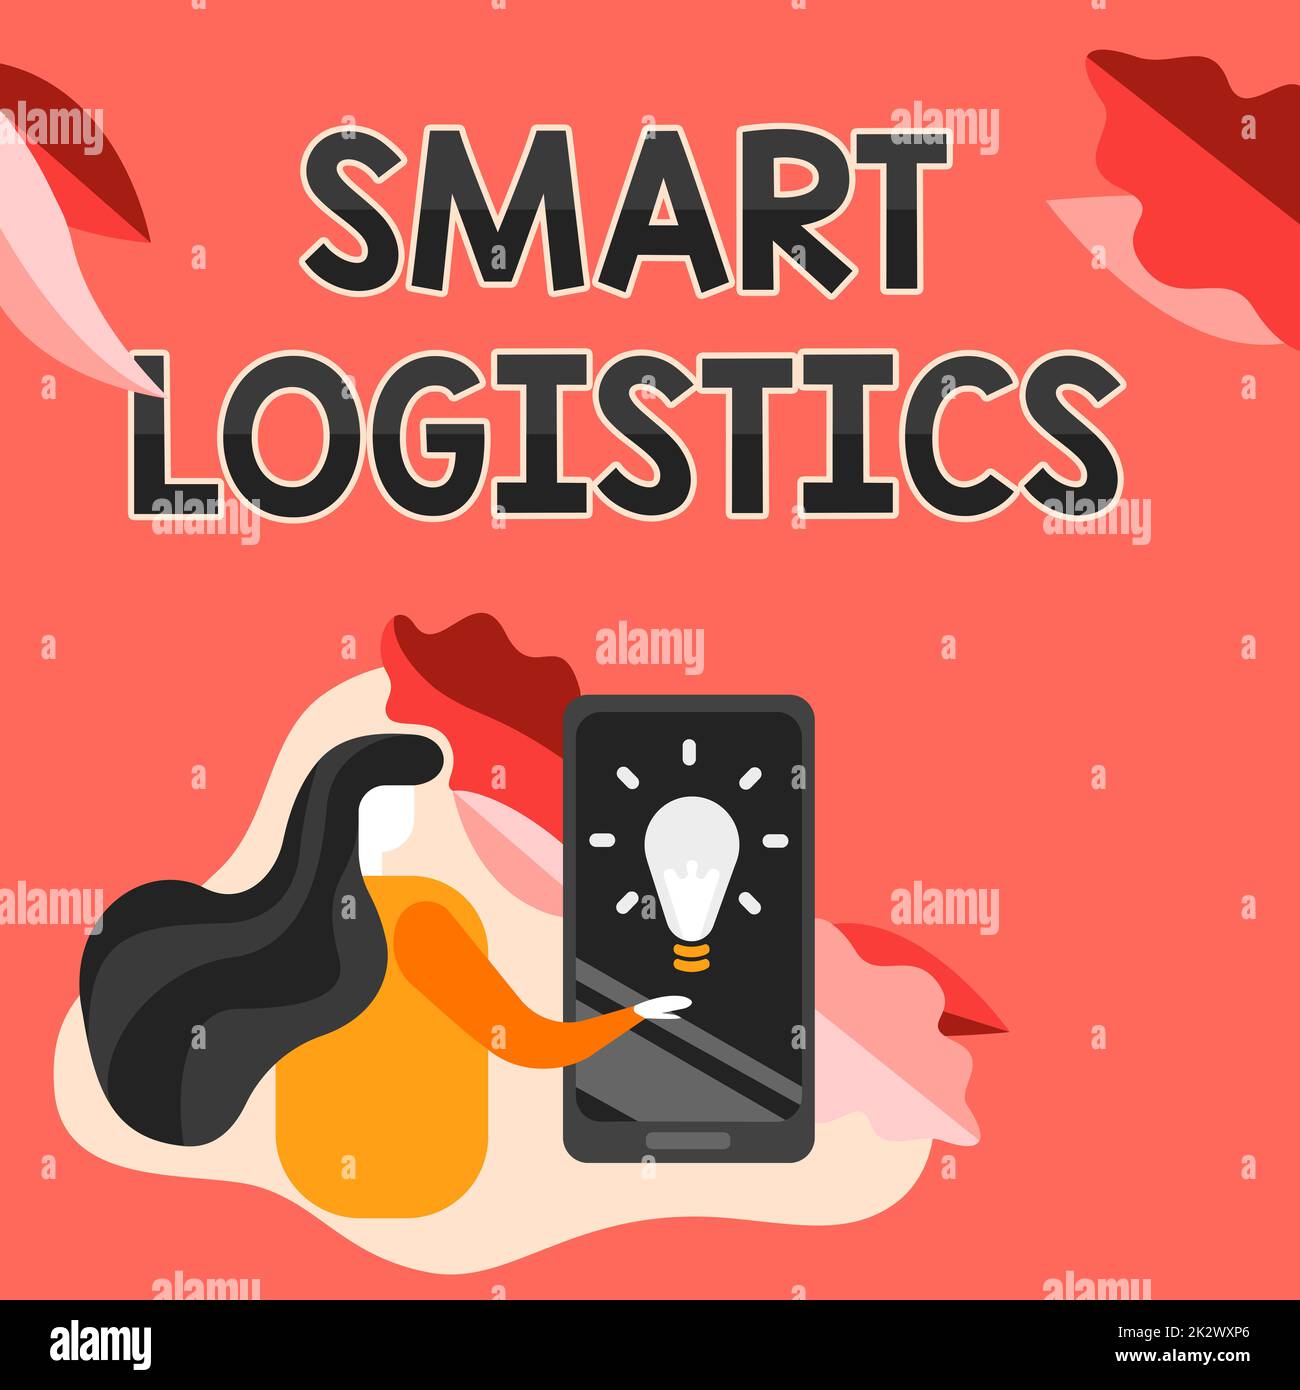 Text showing inspiration Smart Logistics. Business concept integration of intelligent technology in logistics system Lady Pressing Screen Of Mobile Phone Showing The Futuristic Technology. Stock Photo